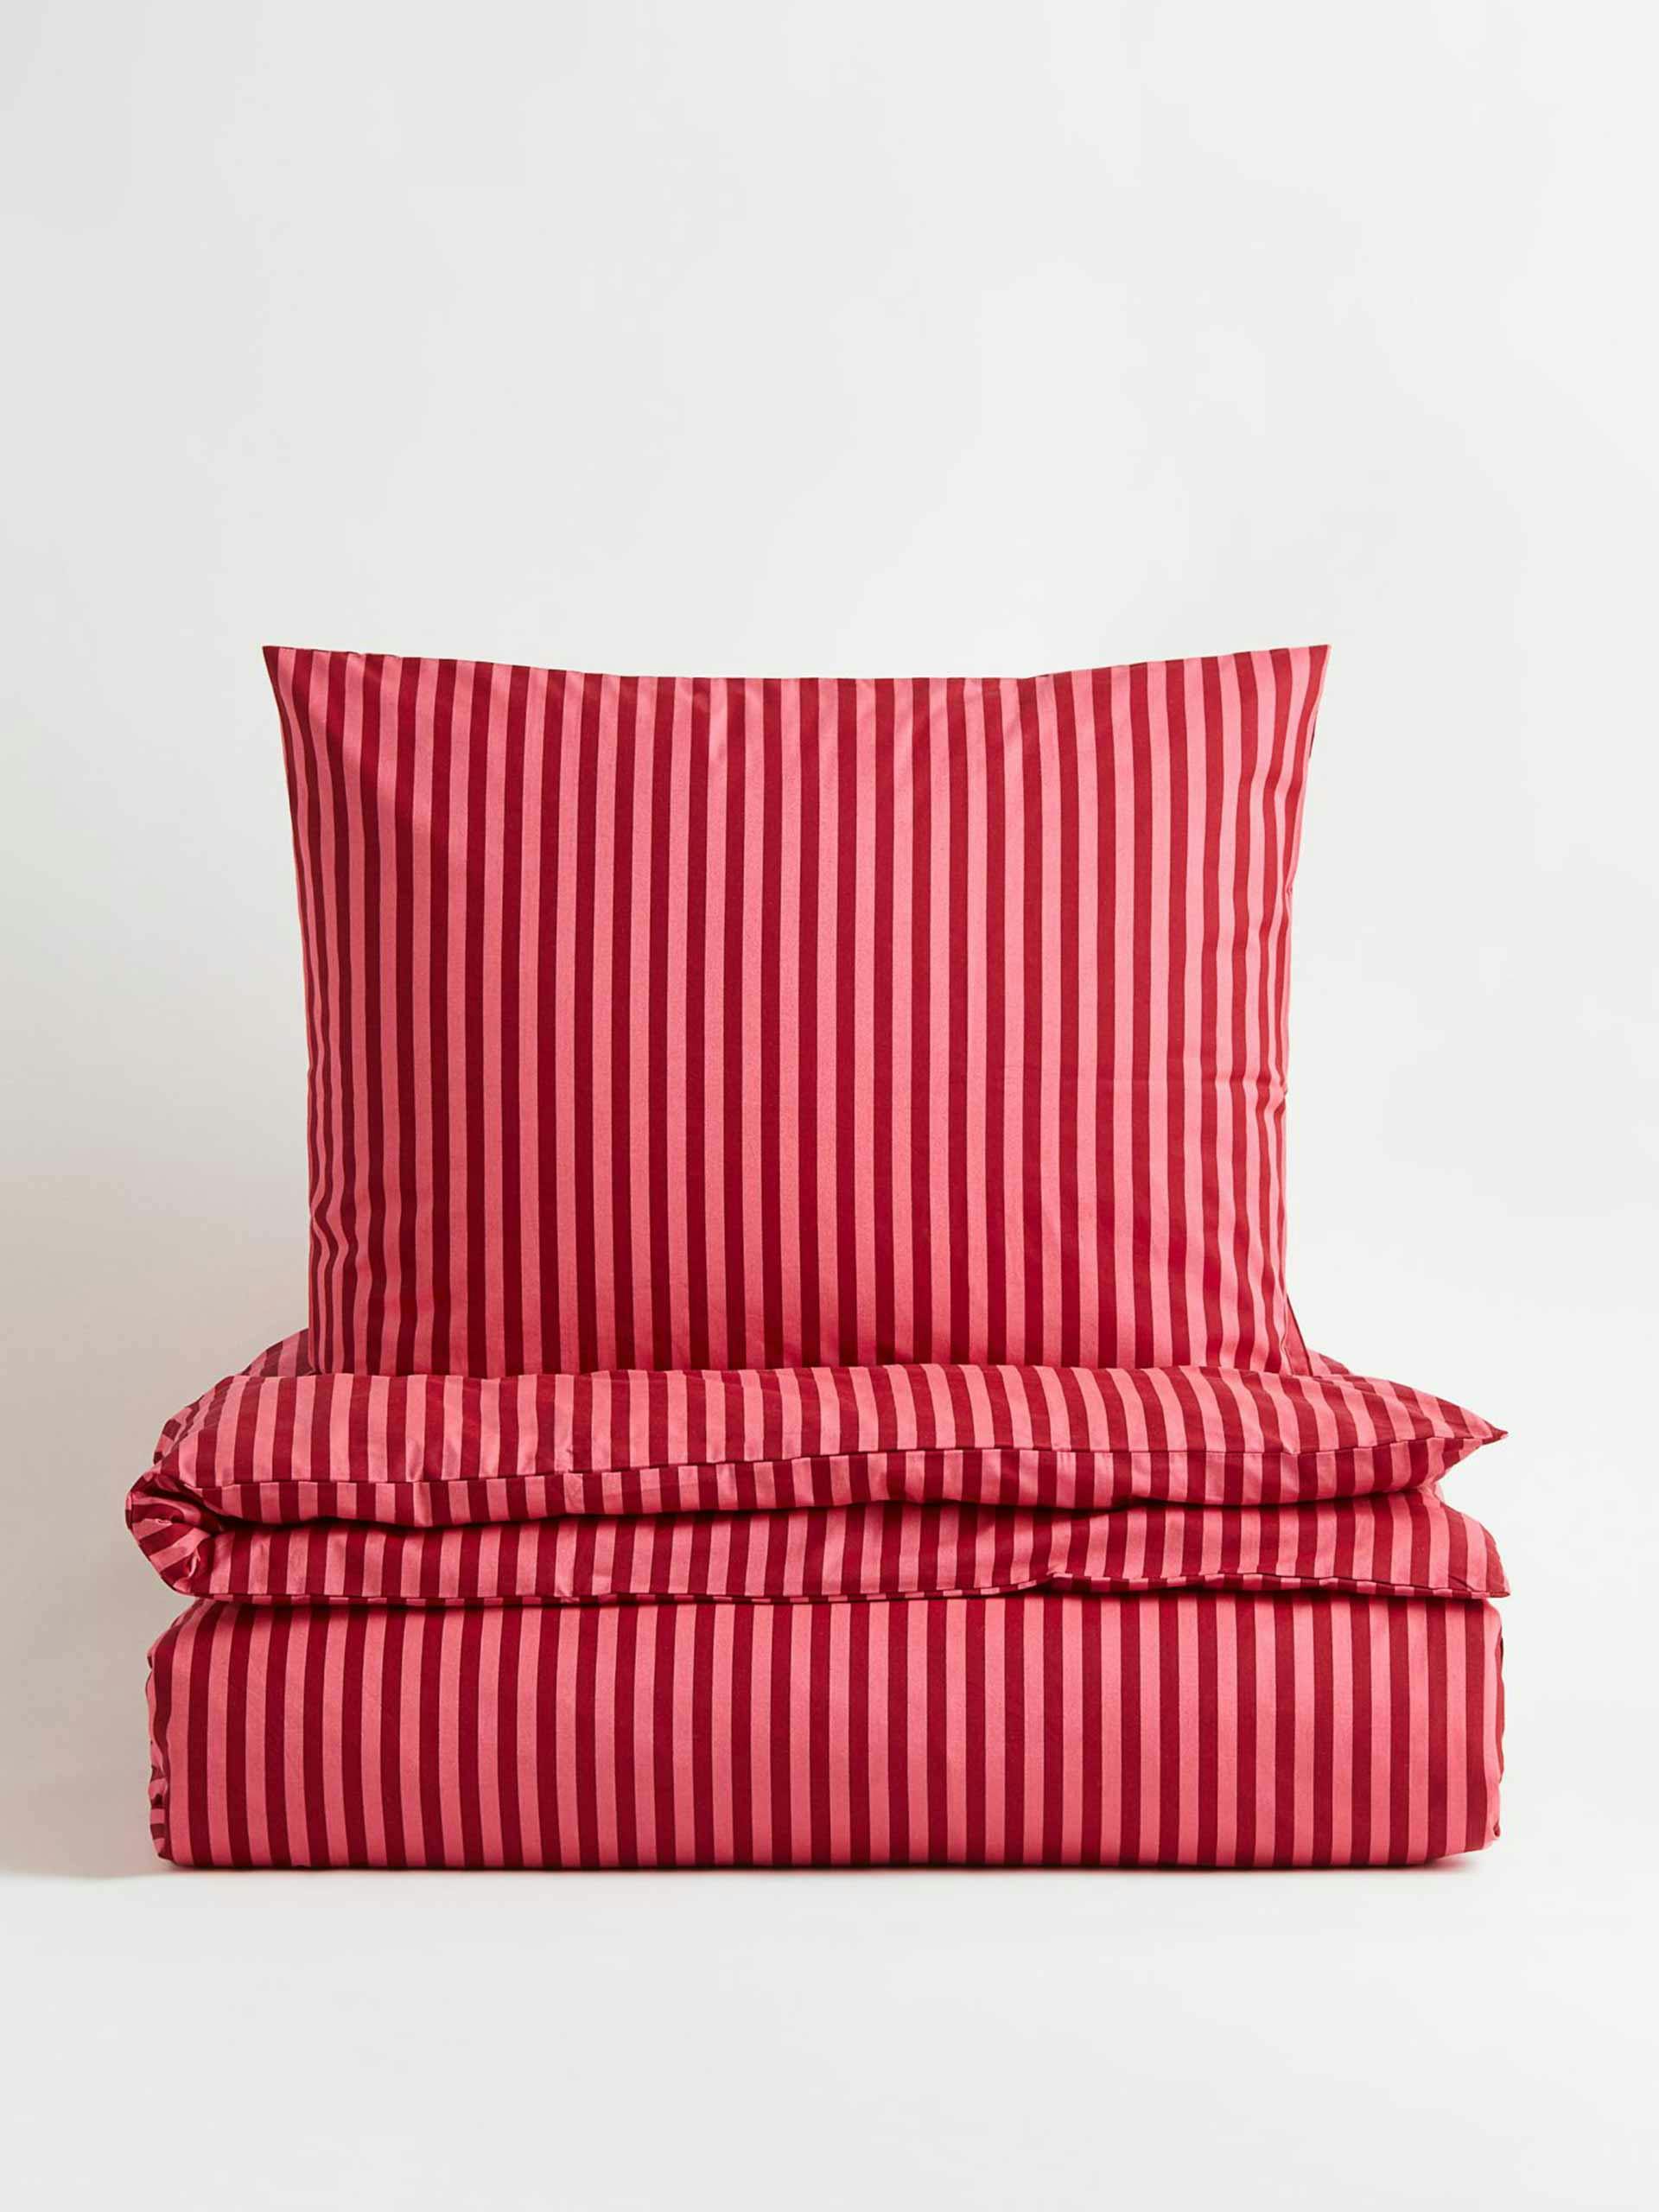 Pink and red striped single duvet set